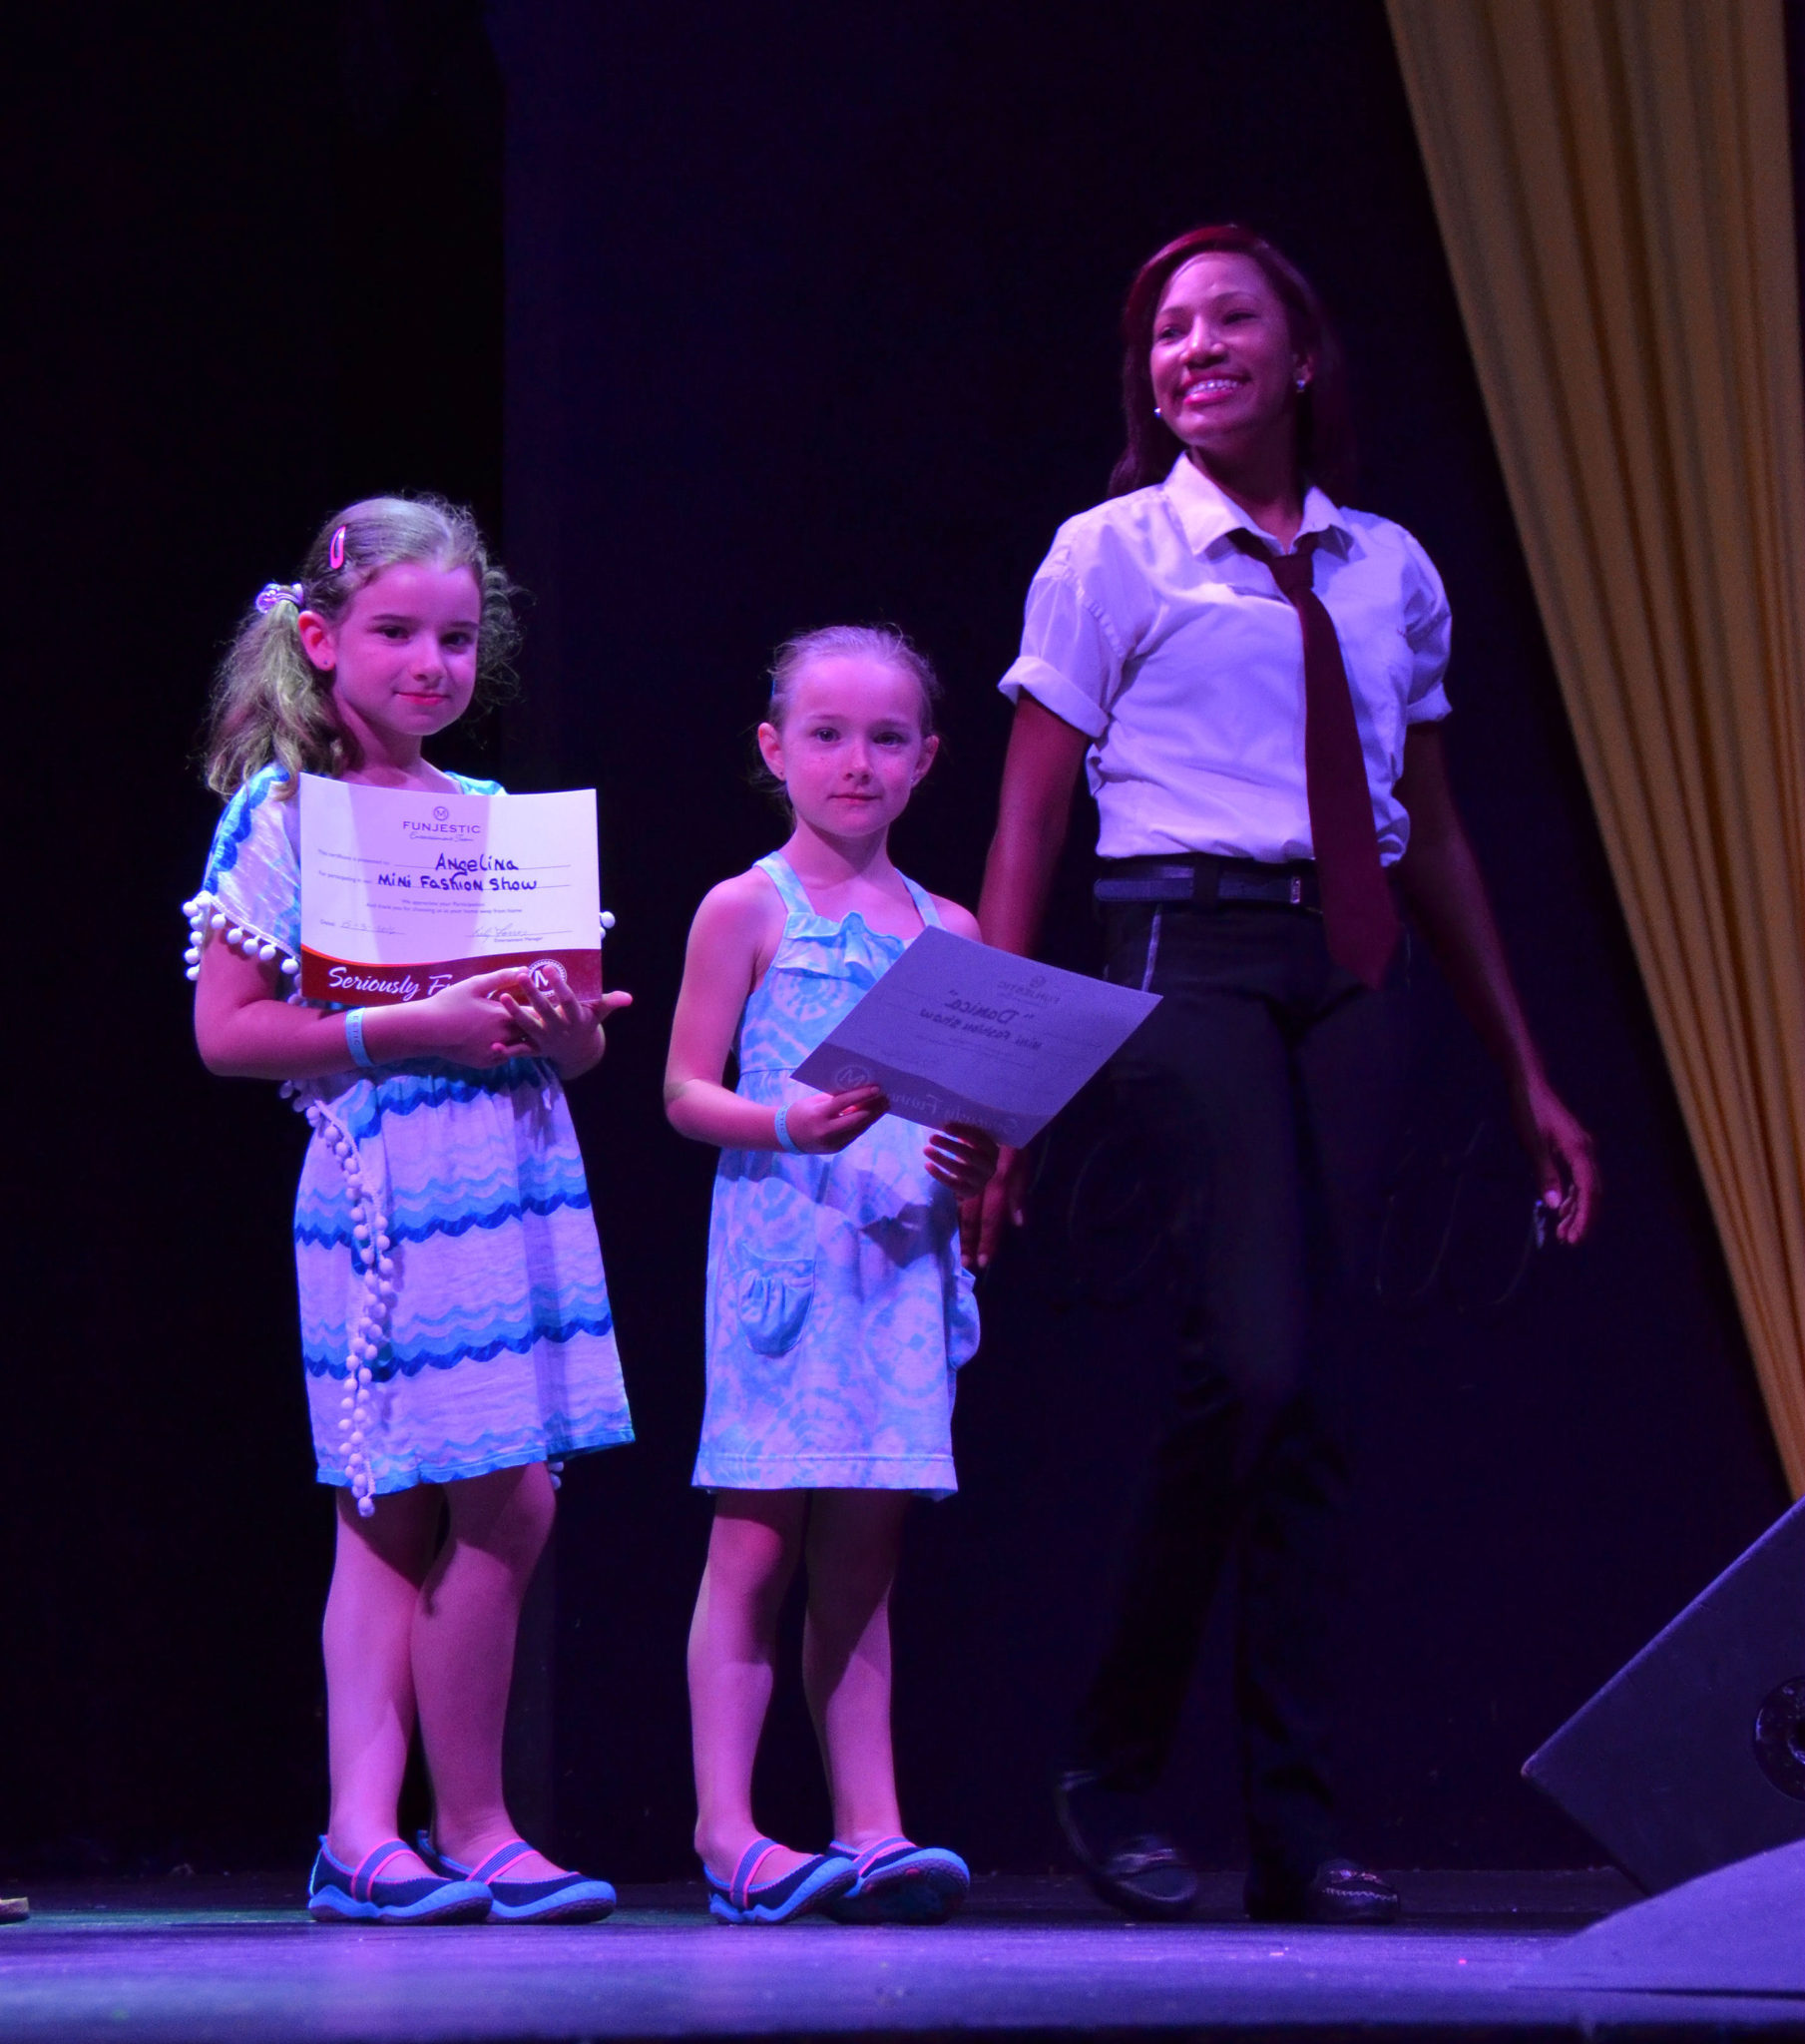 The kids receiving their certificates from the fashion show